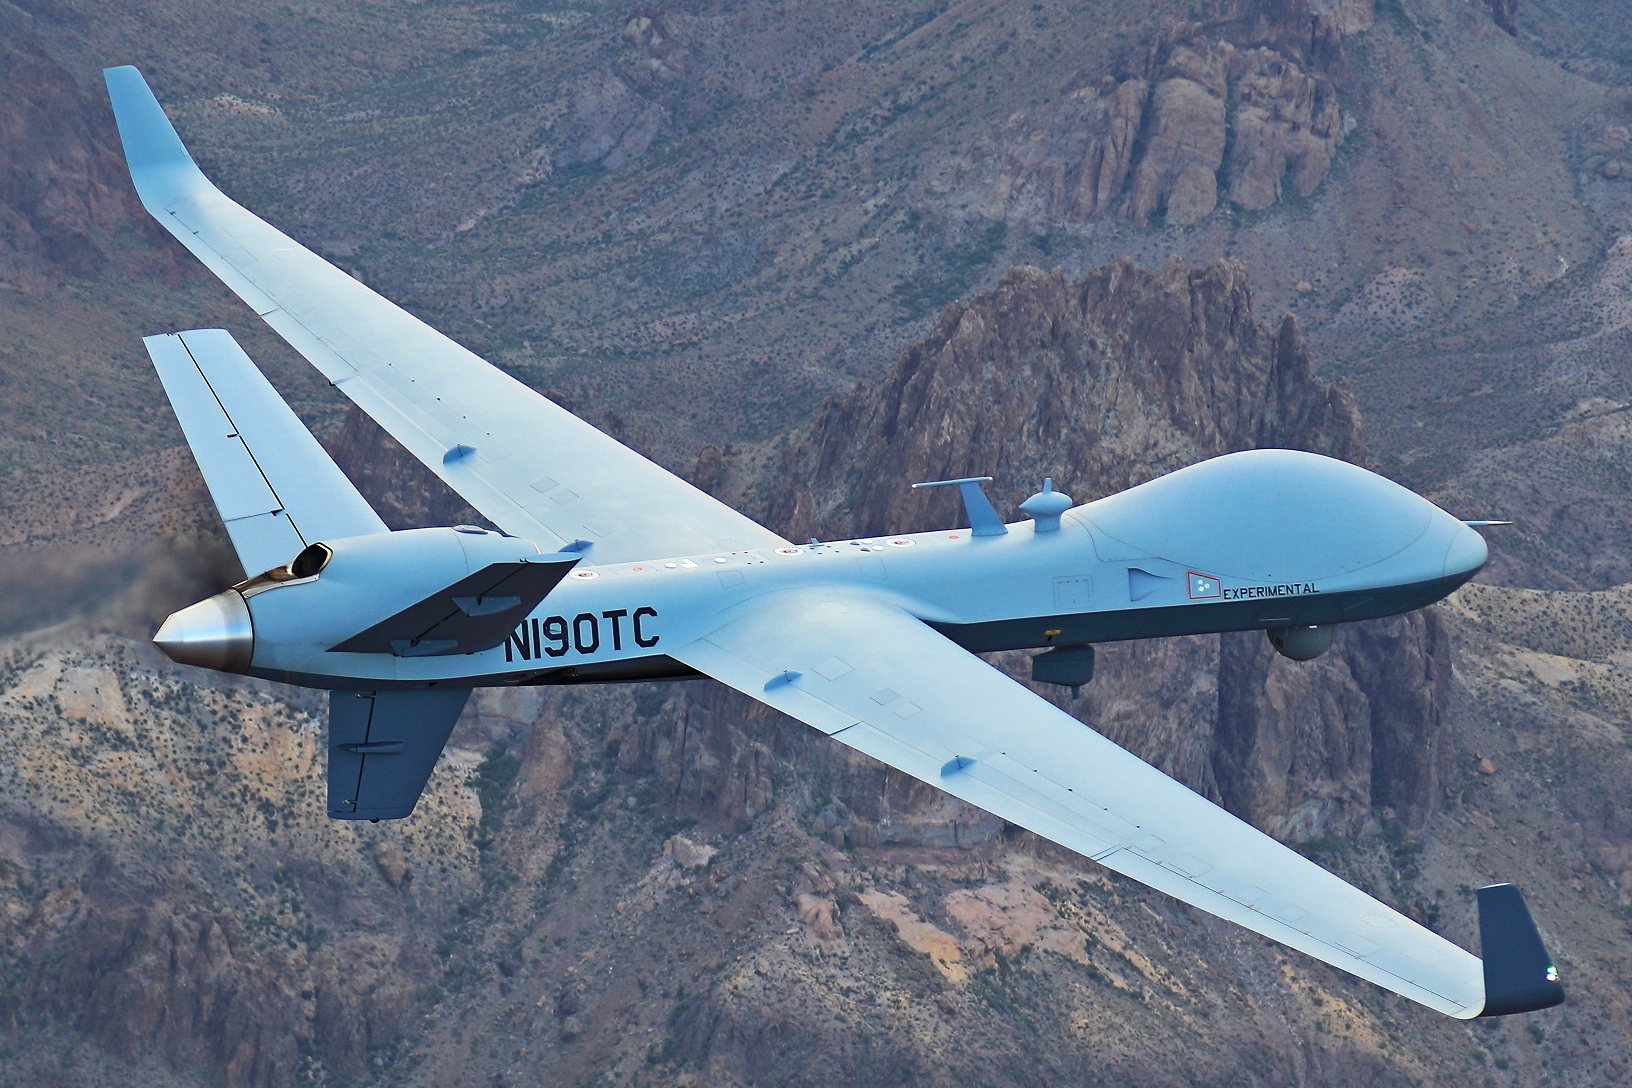 MQ-9B SkyGuardian Remotely Piloted Aircraft System (RPAS) Click to enlarge.